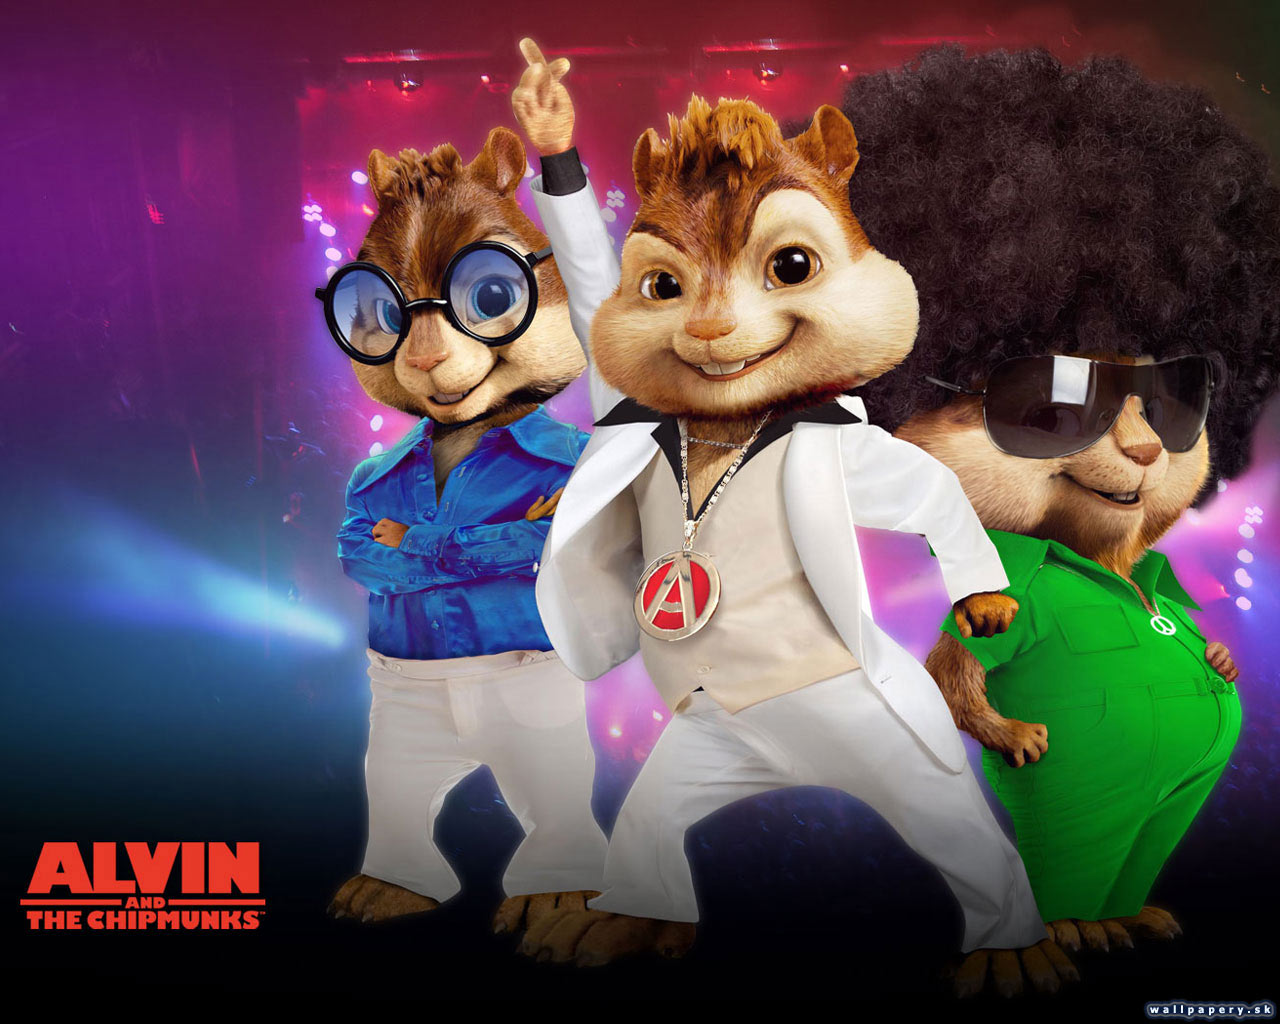 Alvin and The Chipmunks - wallpaper 9